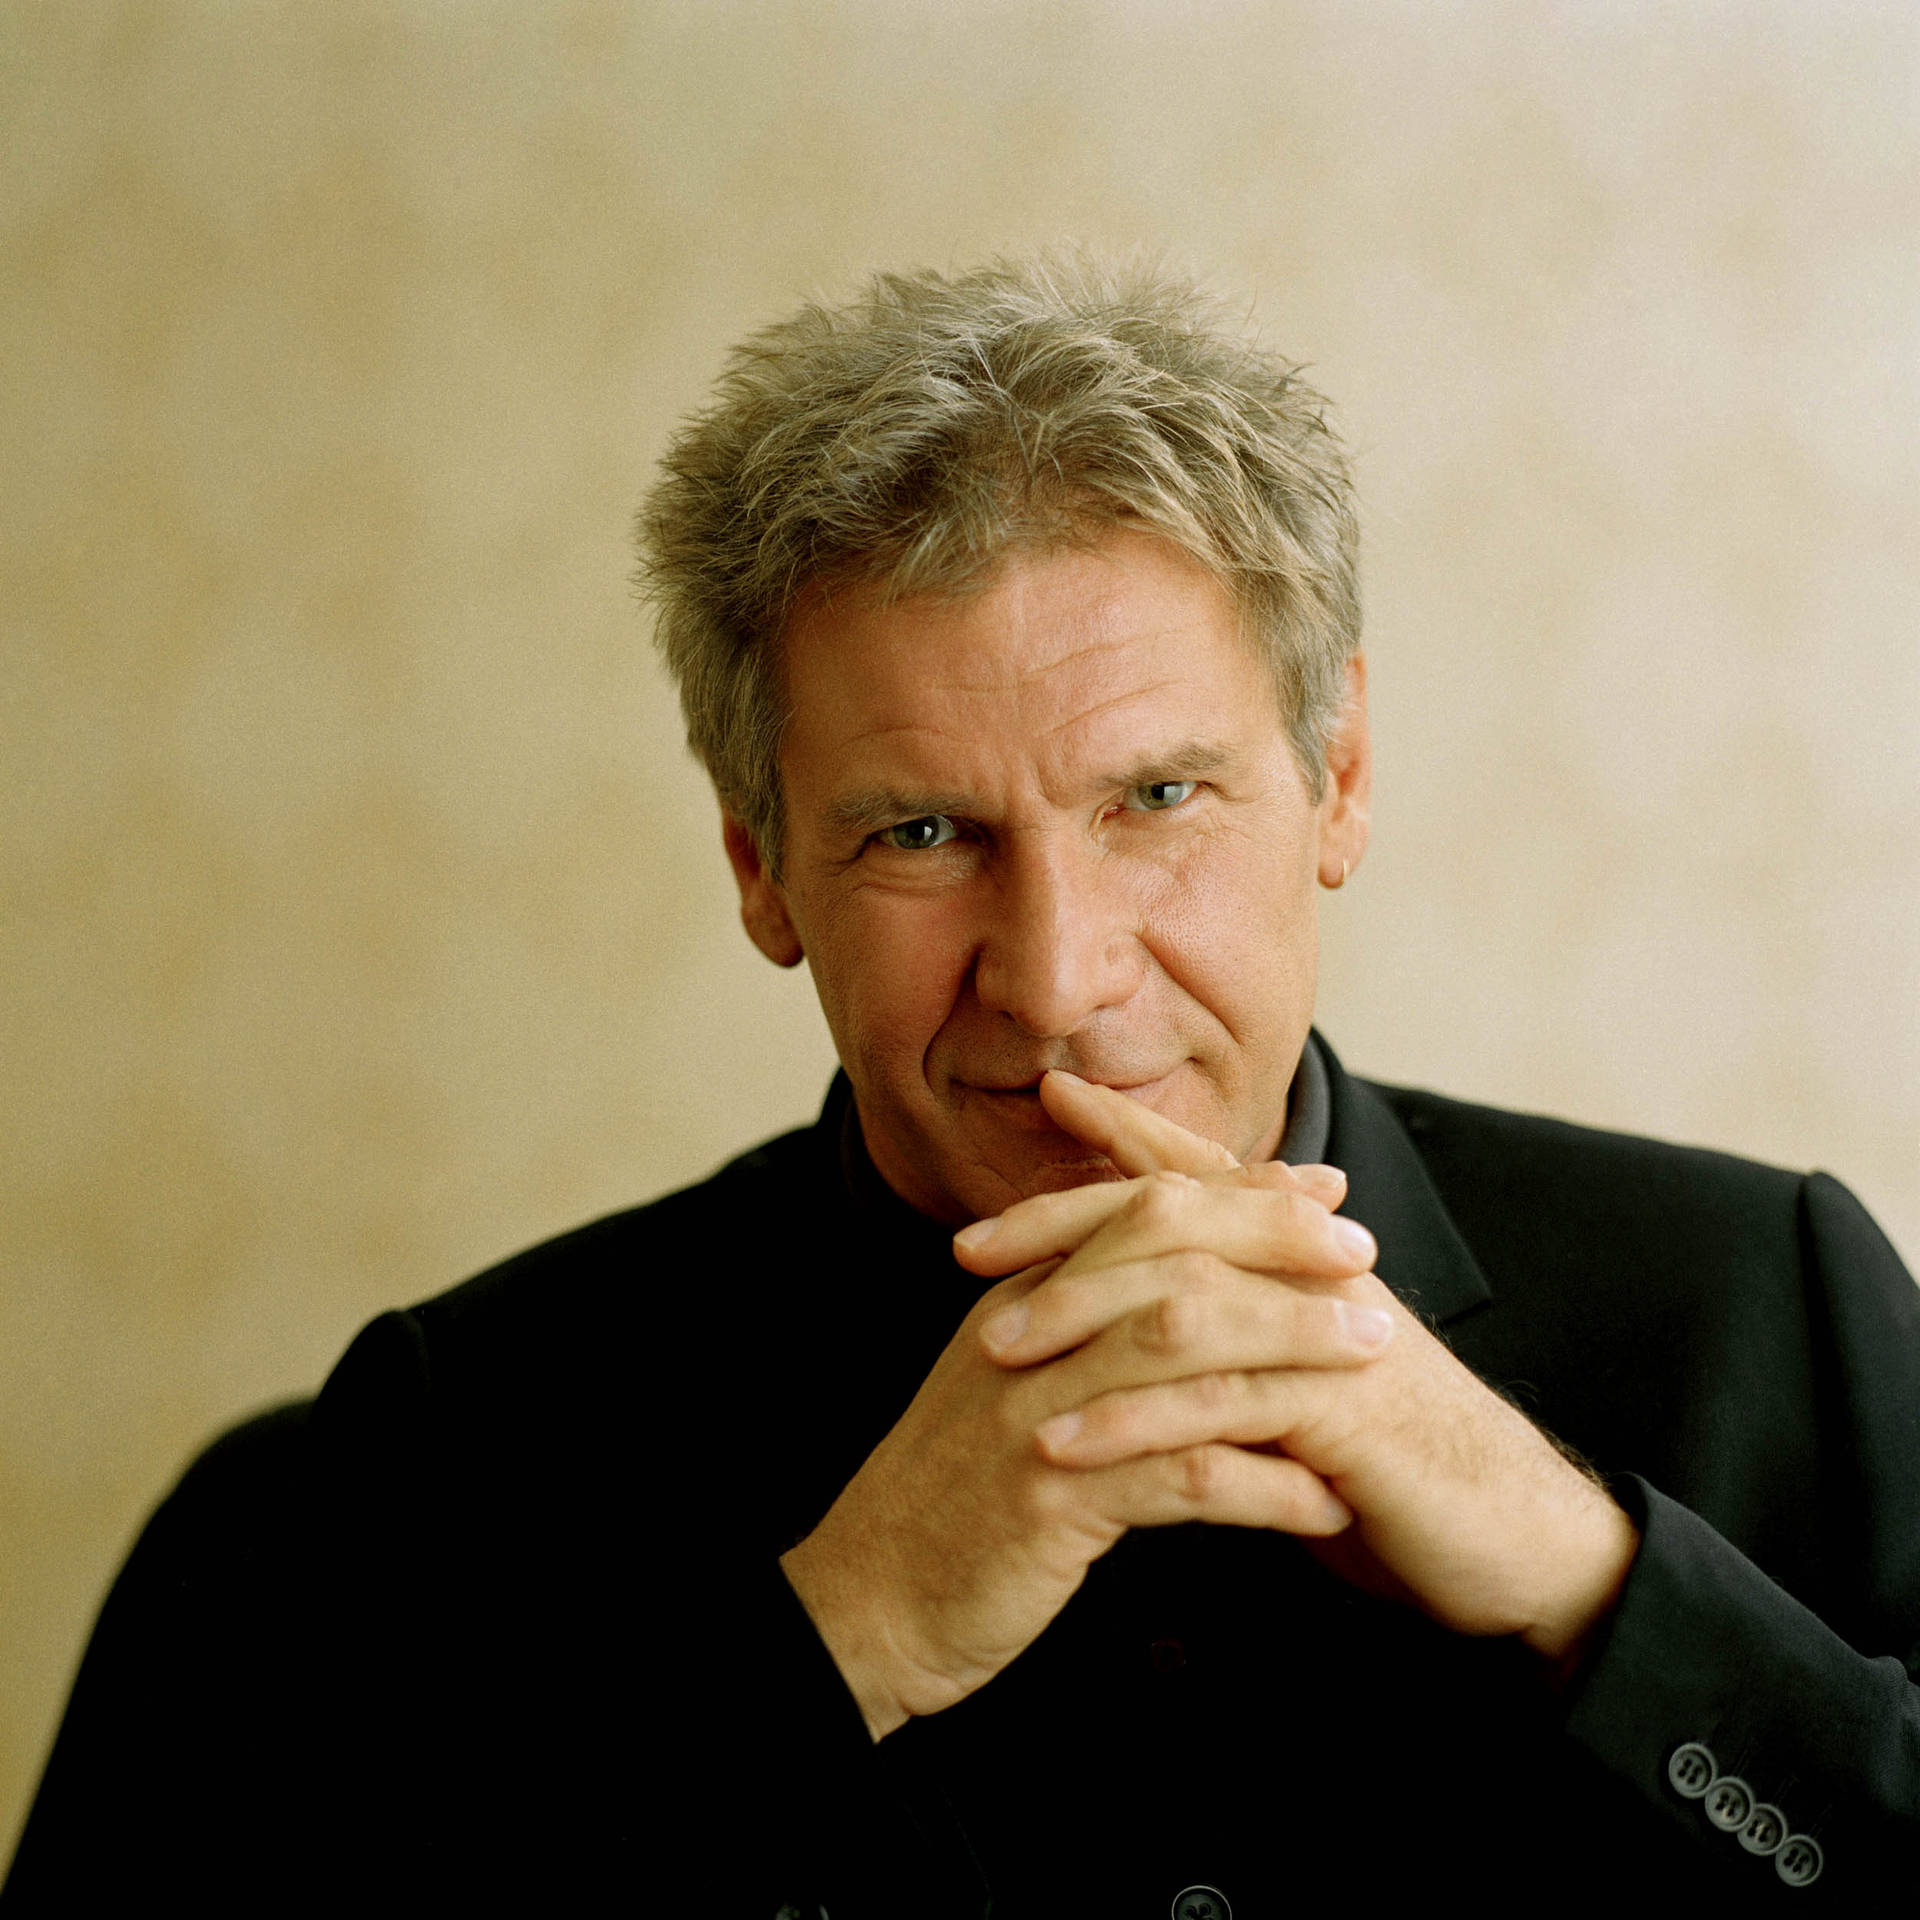 Harrison Ford Graff Ender’s Game Picture